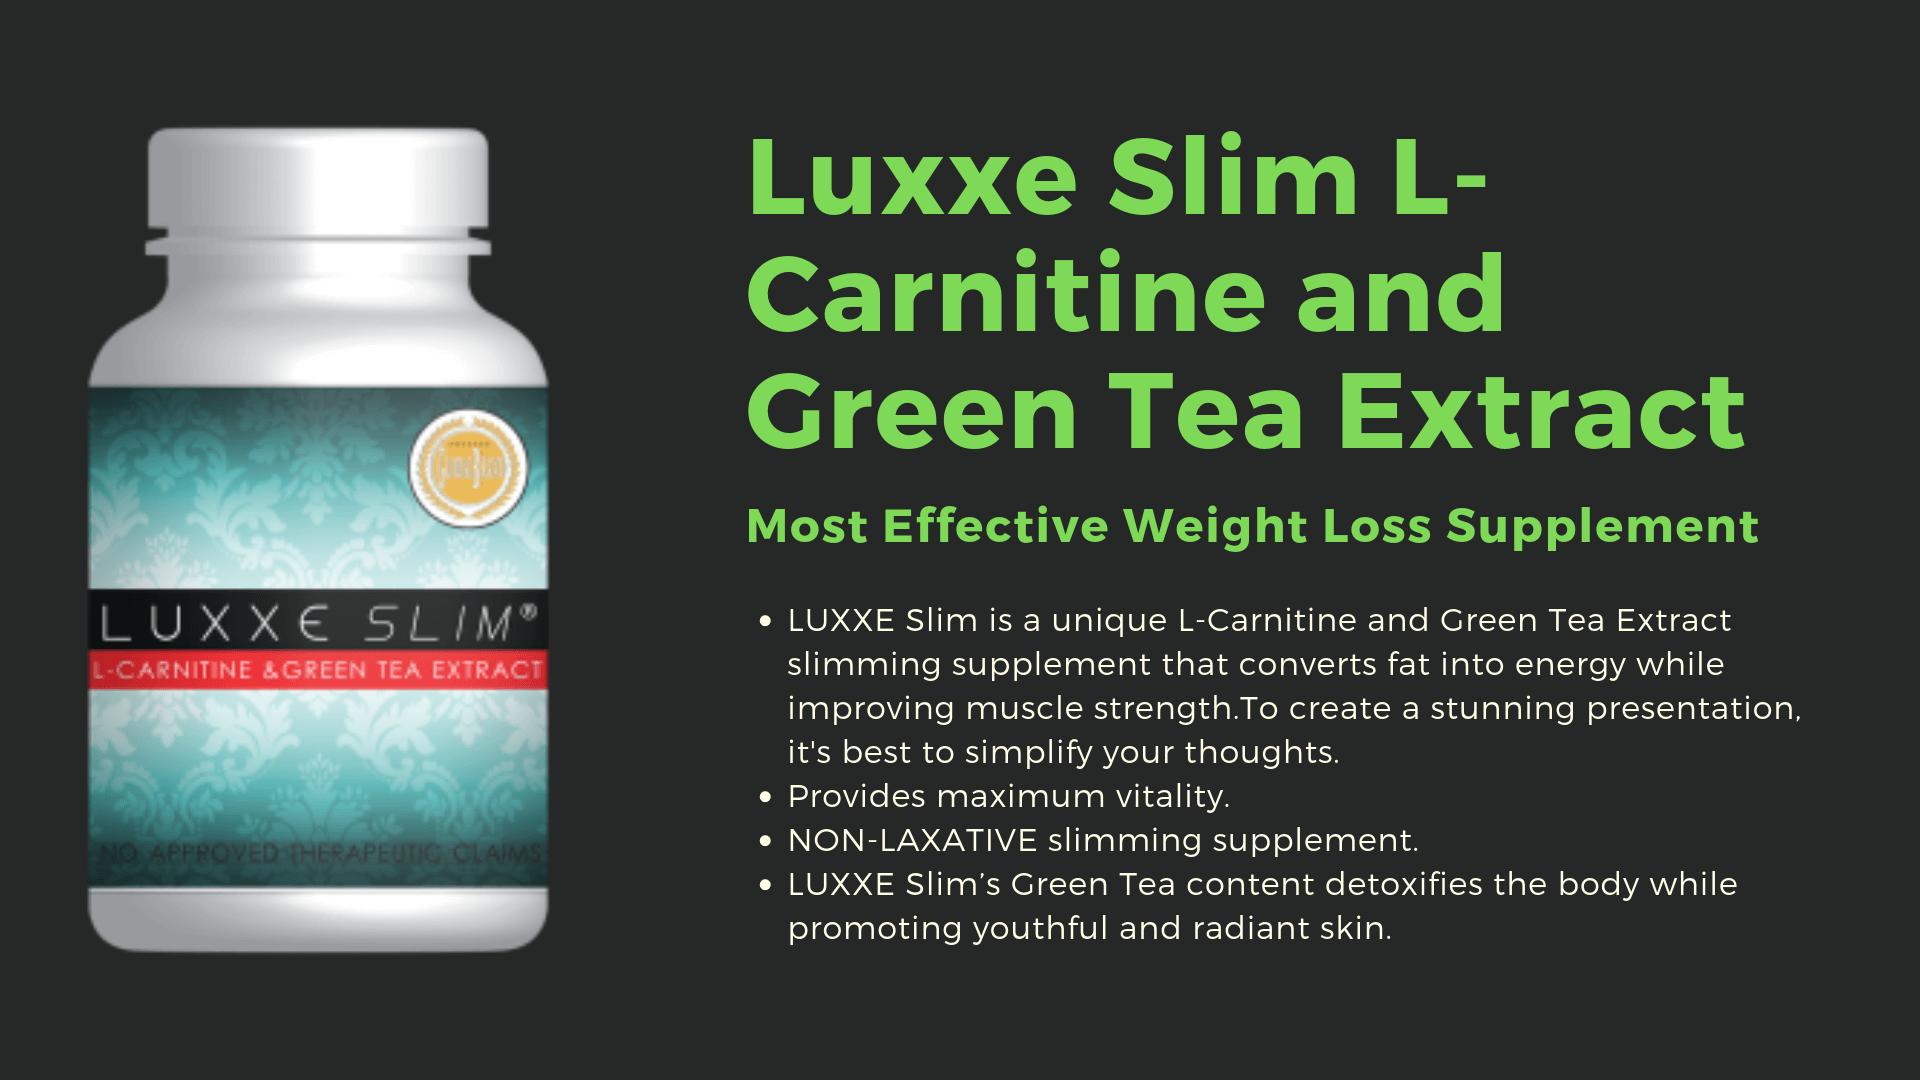 luxxe slim l-carnitine and green tea extract image details